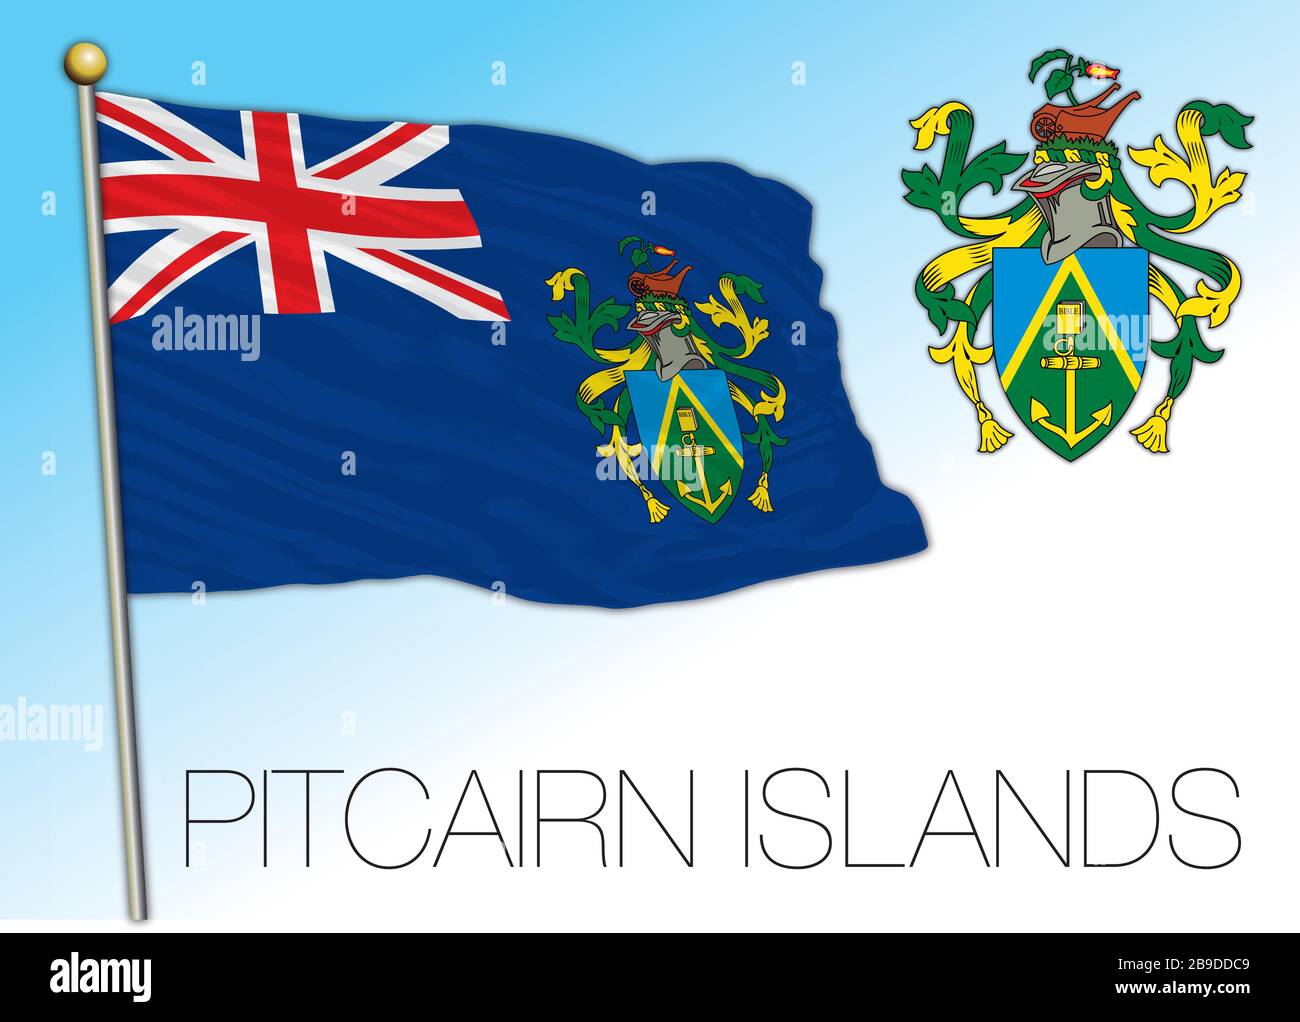 Pitcairn Islands official national flag and coat of arms, UK, vector illustration Stock Vector